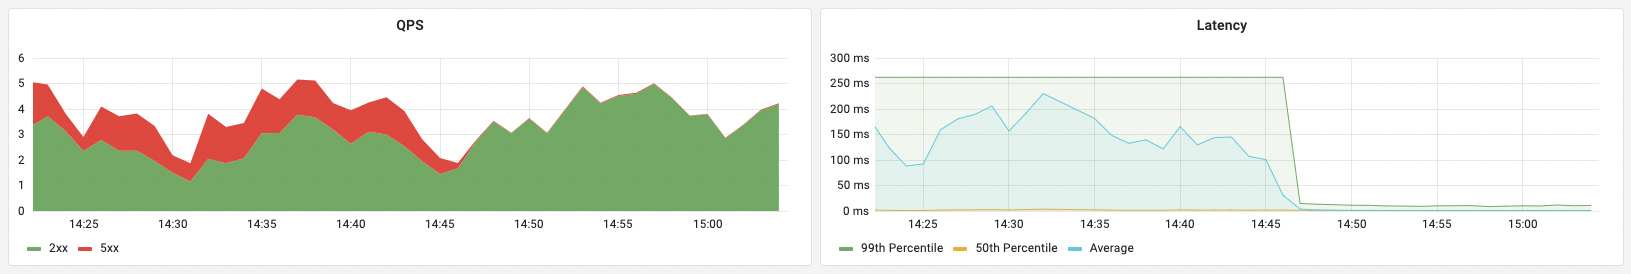 QPS and latency of requests to memcached